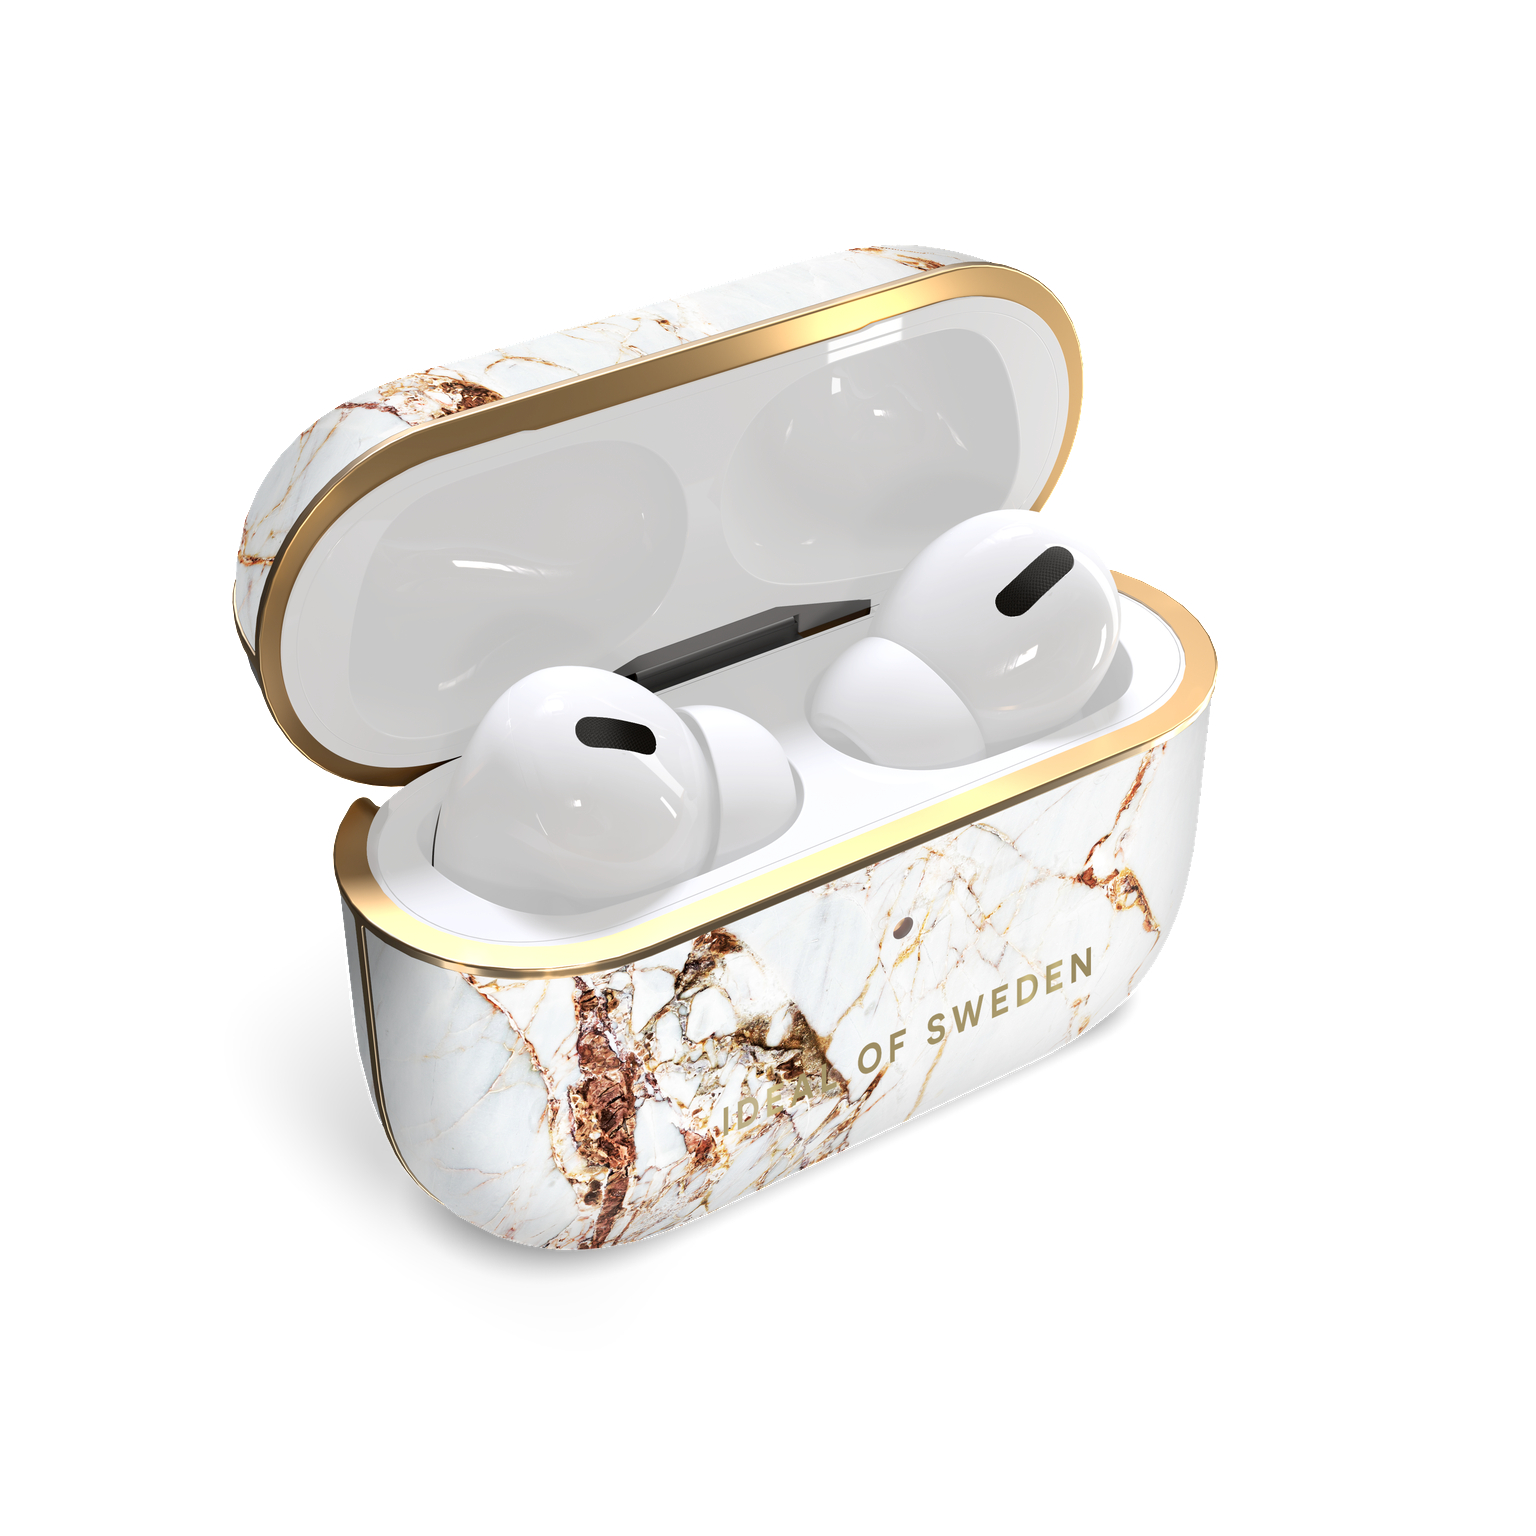 IDEAL Case SWEDEN IDFAPC-PRO-46 OF AirPod